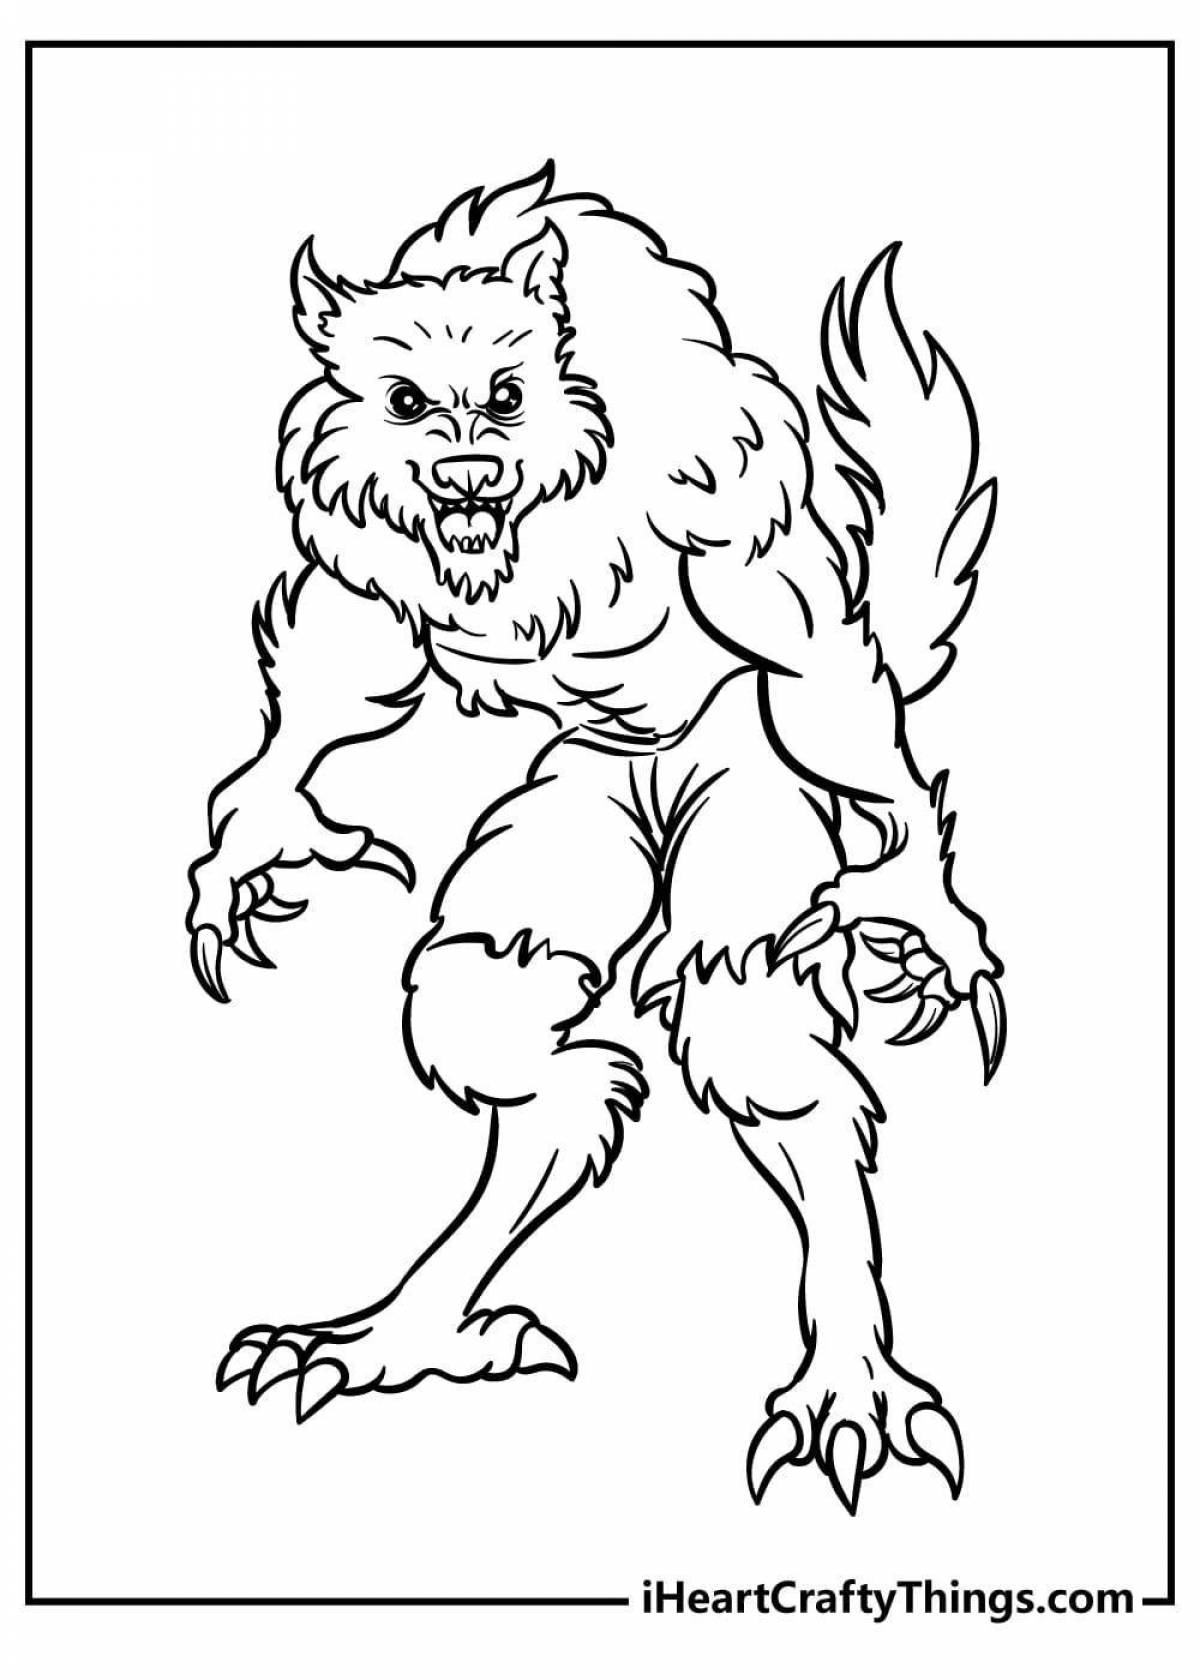 Coloring page trembling werewolf for kids